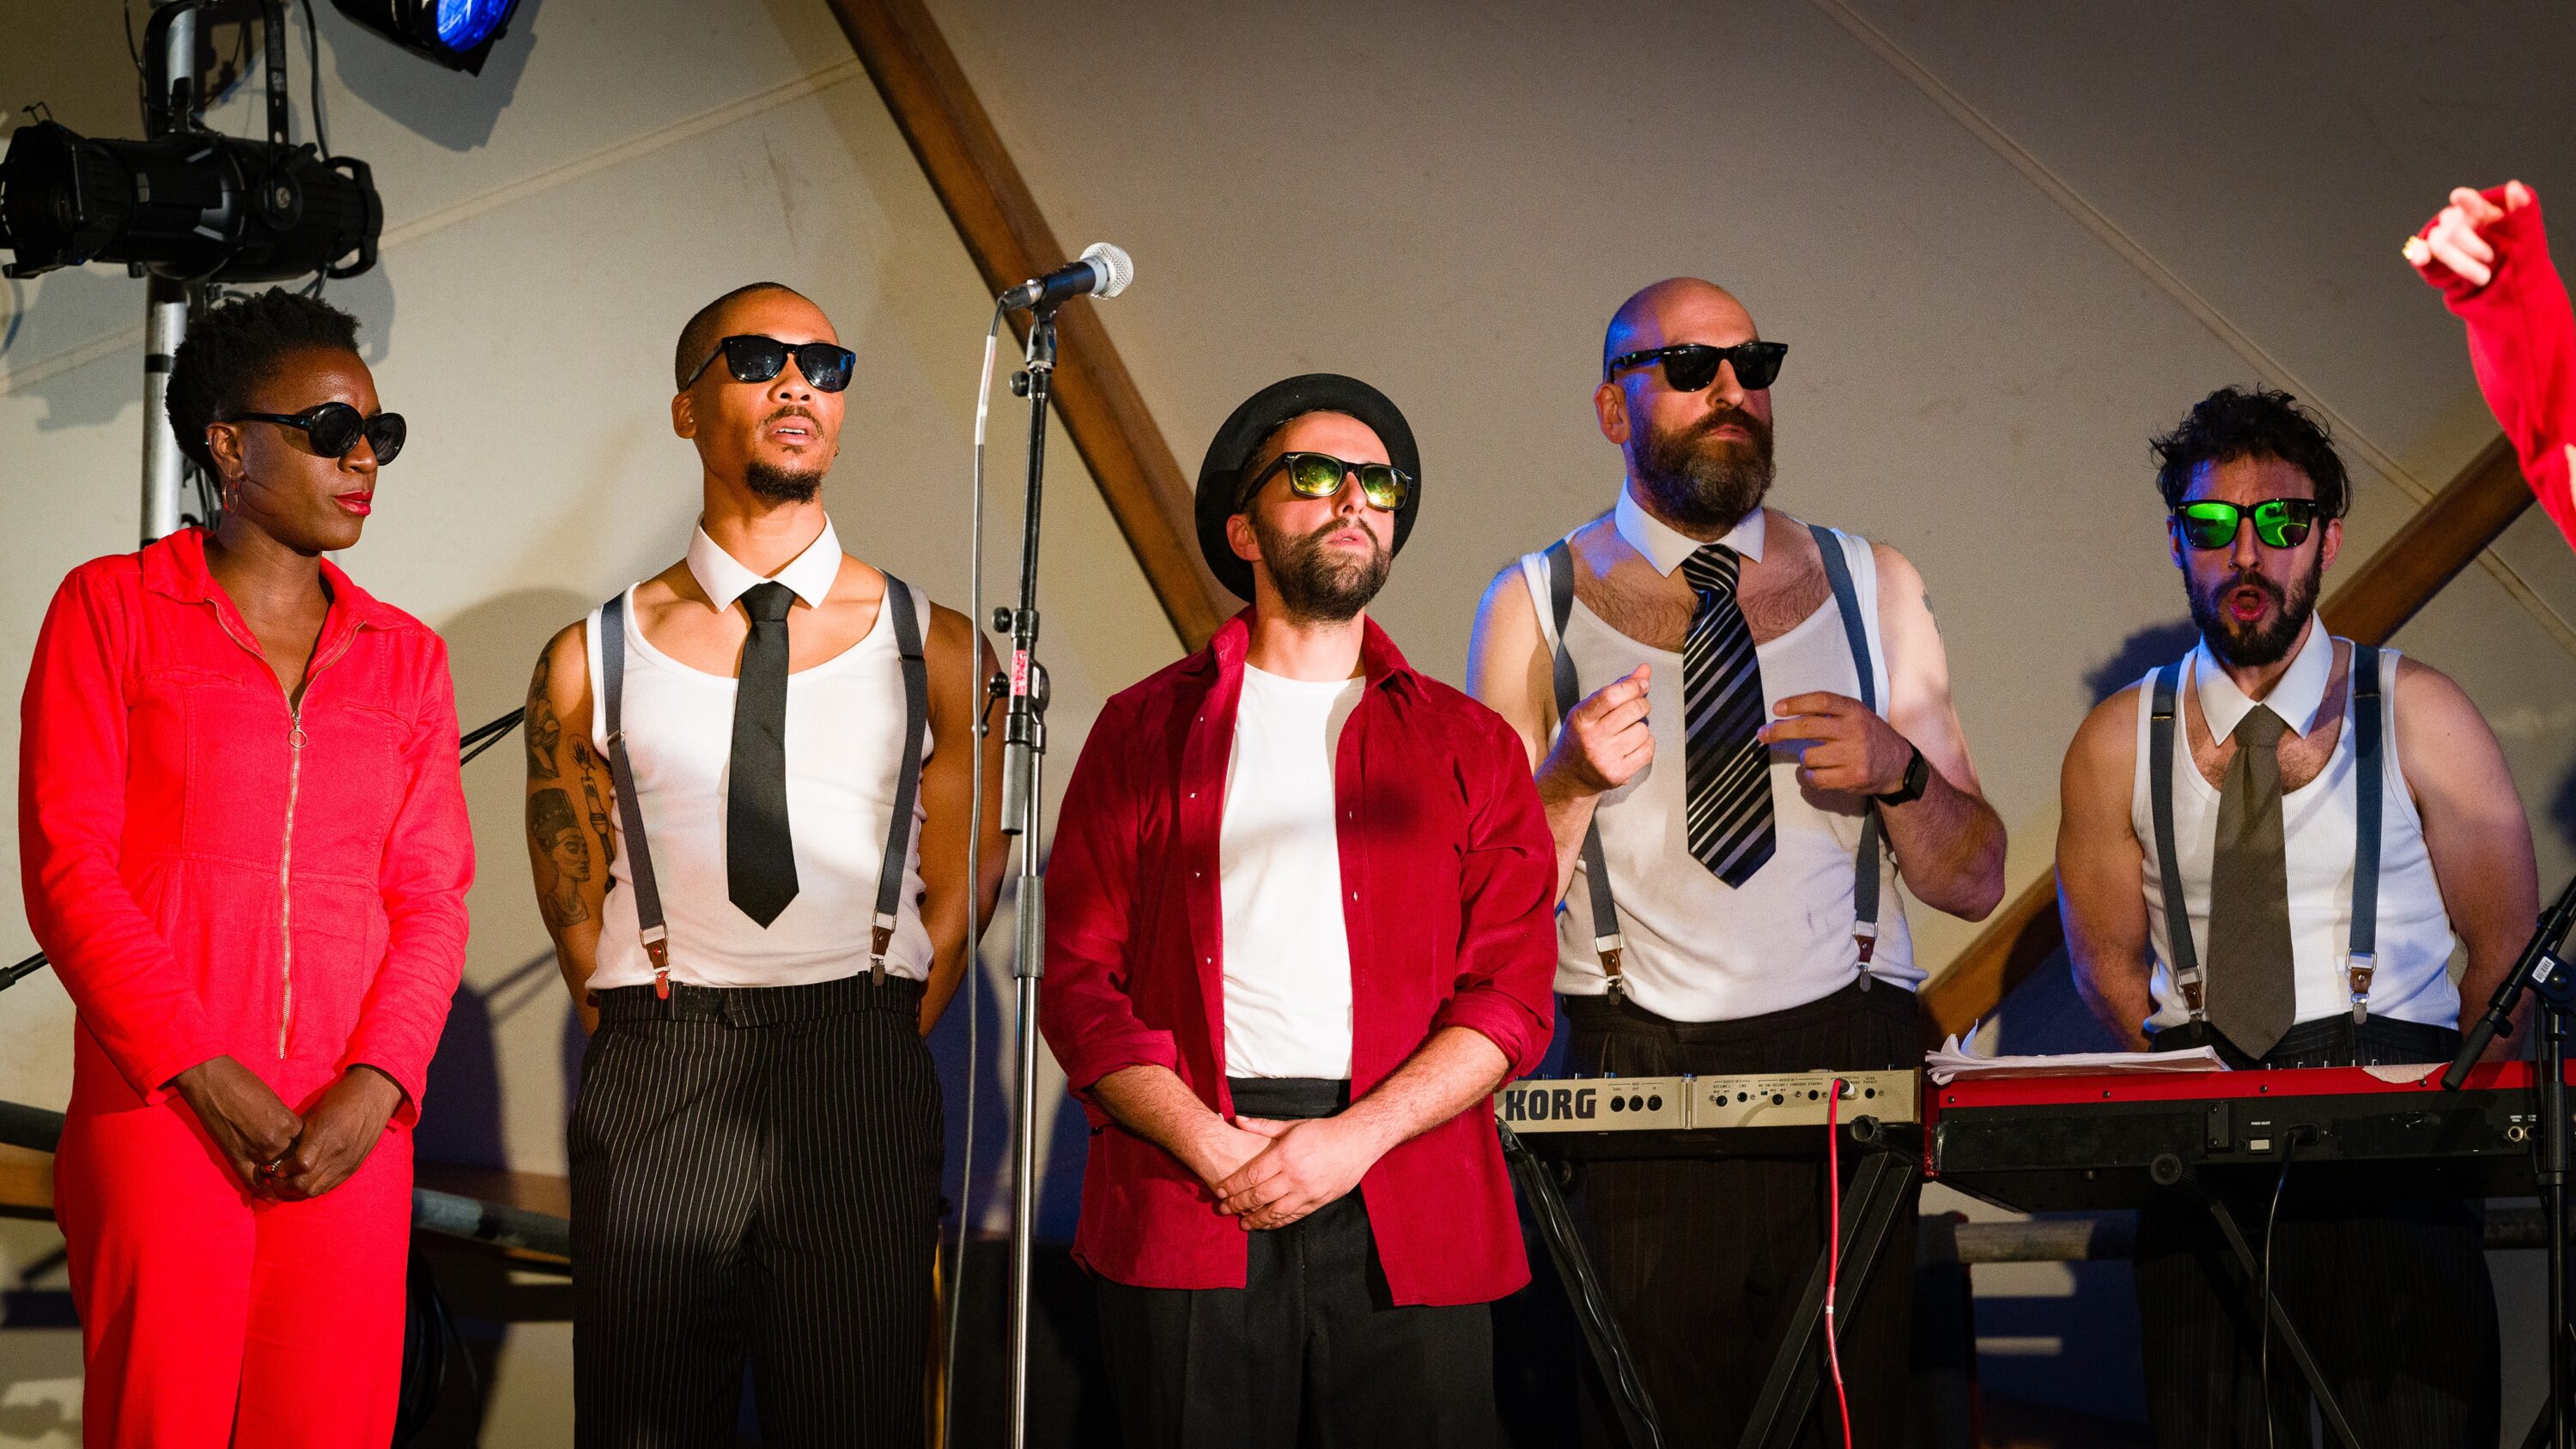 Photograph from Kneehigh's Ubu. The image features 'The Sweaty Bureaucrats band' standing on stage dressed in red, white and black with sunglasses.